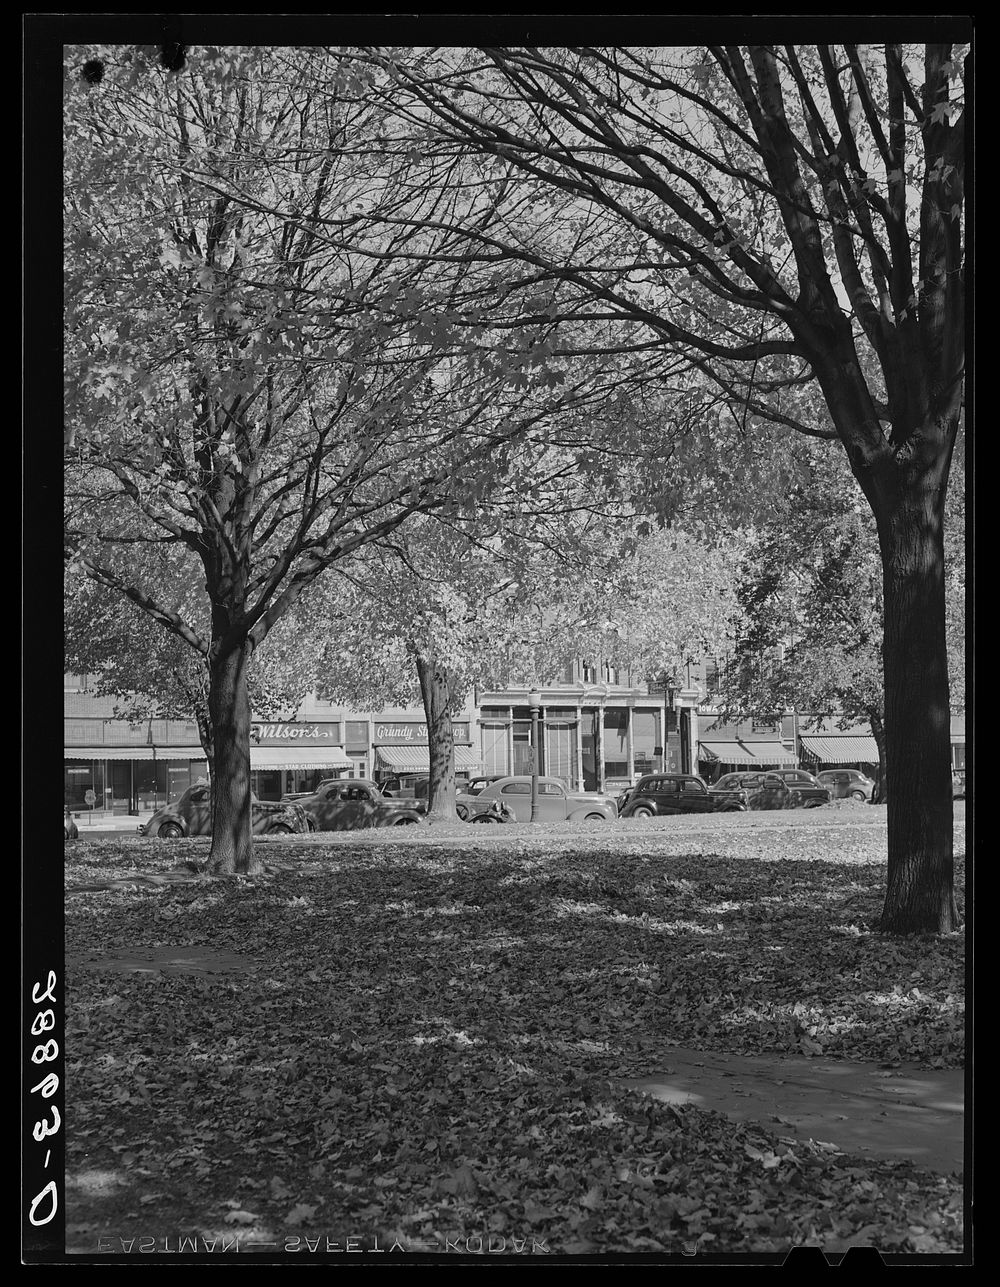 Leaves on courthouse lawn. Grundy Center, Iowa. Sourced from the Library of Congress.